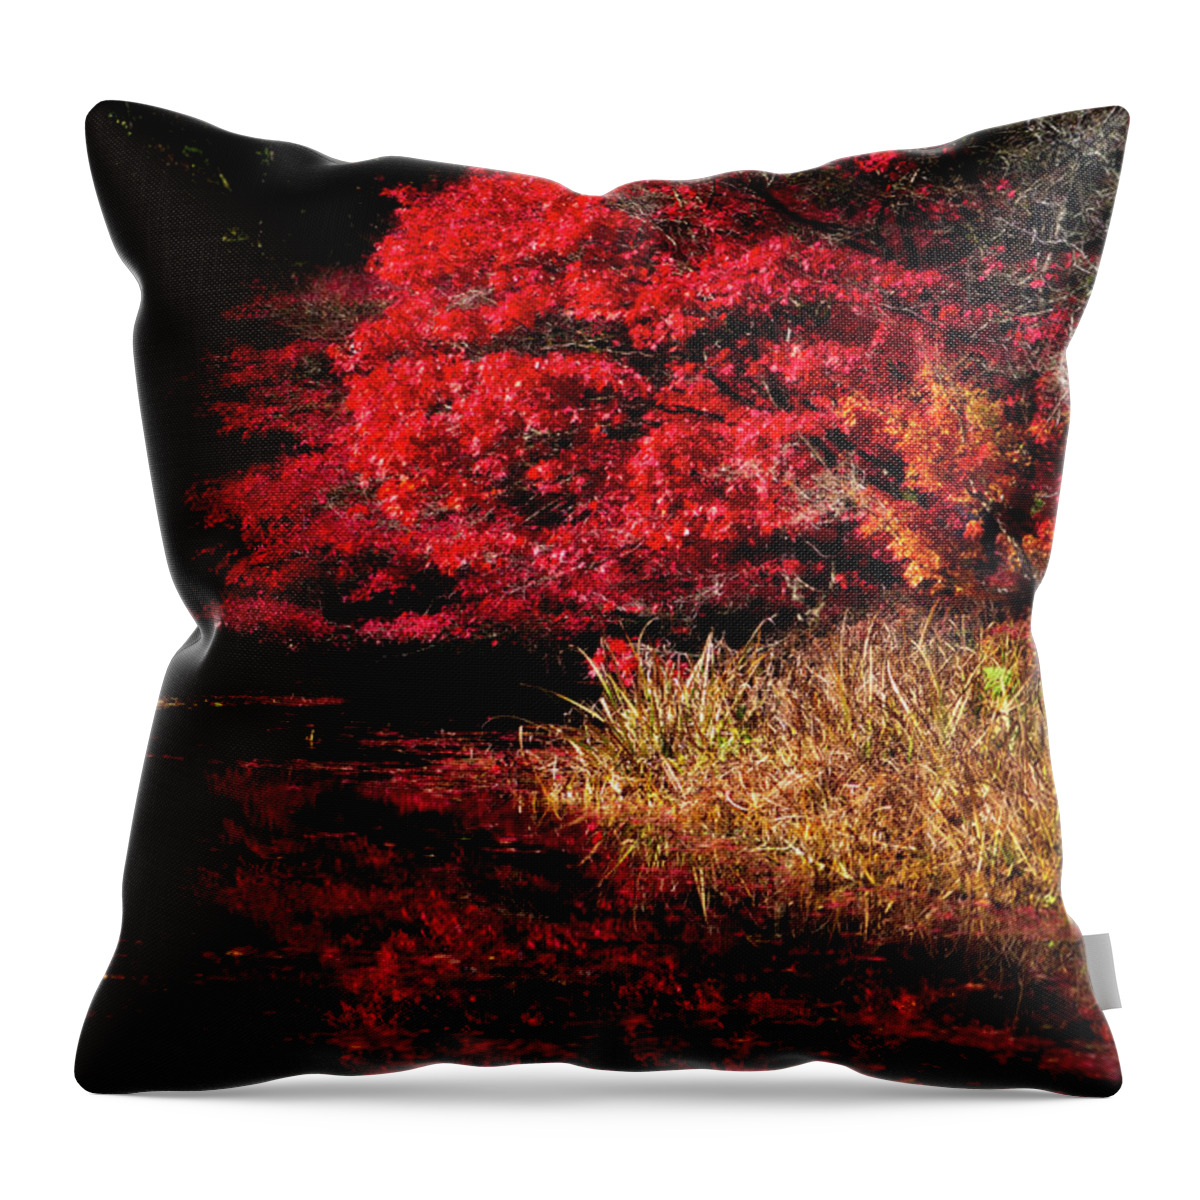 Botanical Throw Pillow featuring the photograph I Can't Stop Looking at My Reflection by Venetta Archer